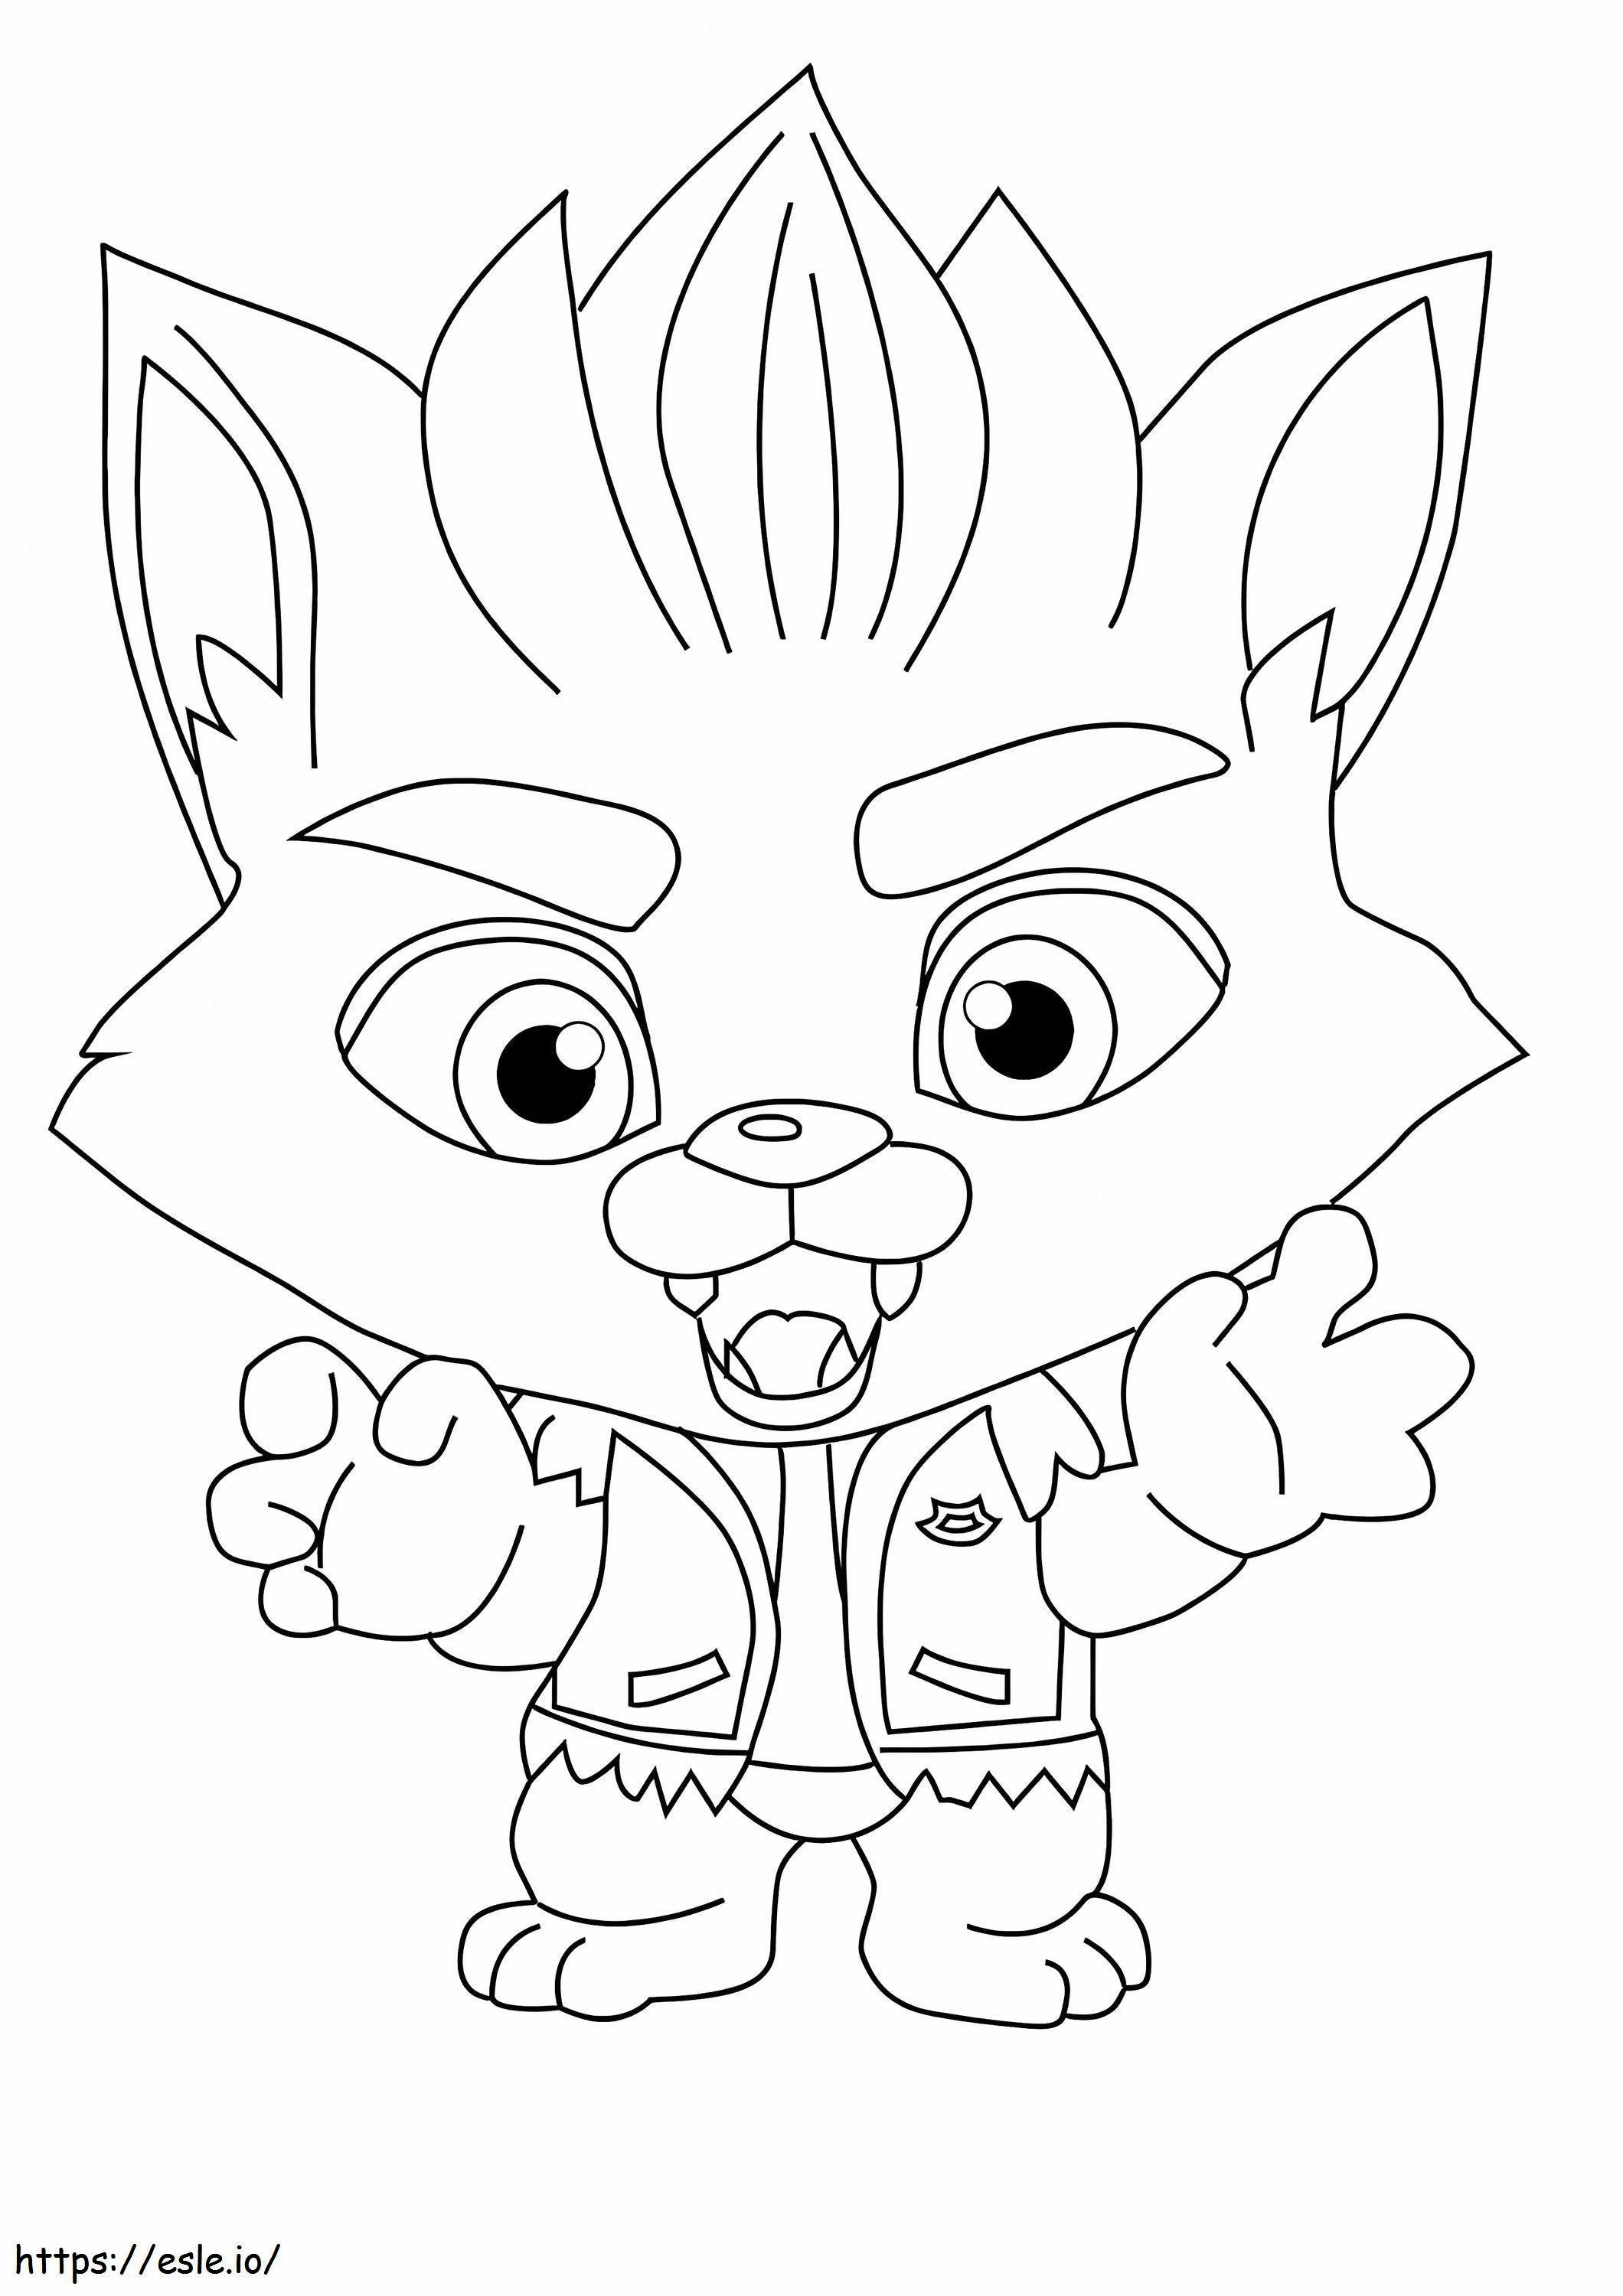 Lobo Howler From Super Monsters coloring page